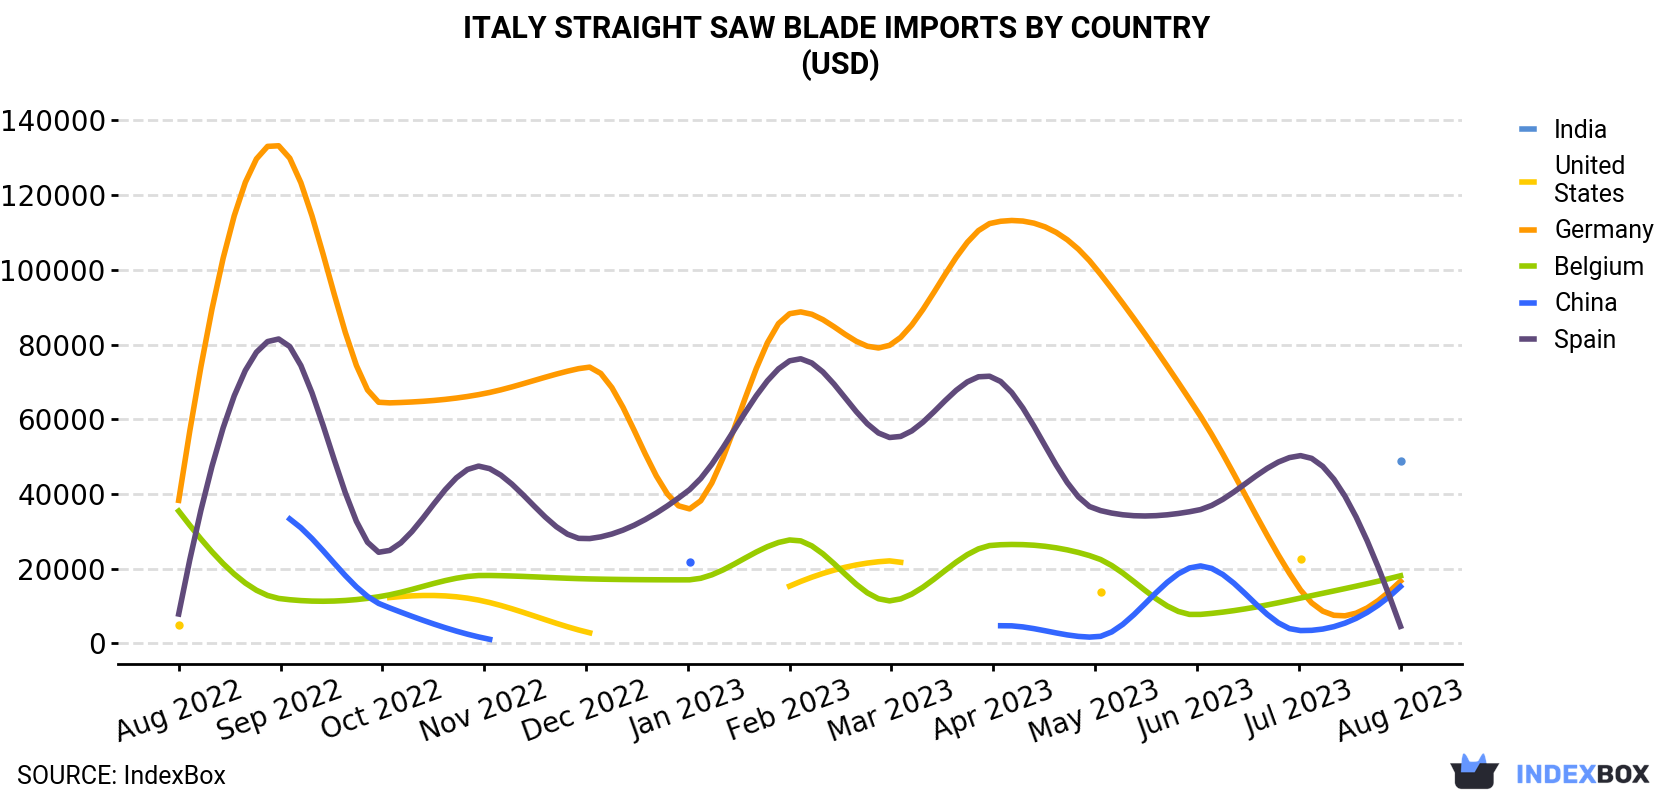 Italy Straight Saw Blade Imports By Country (USD)